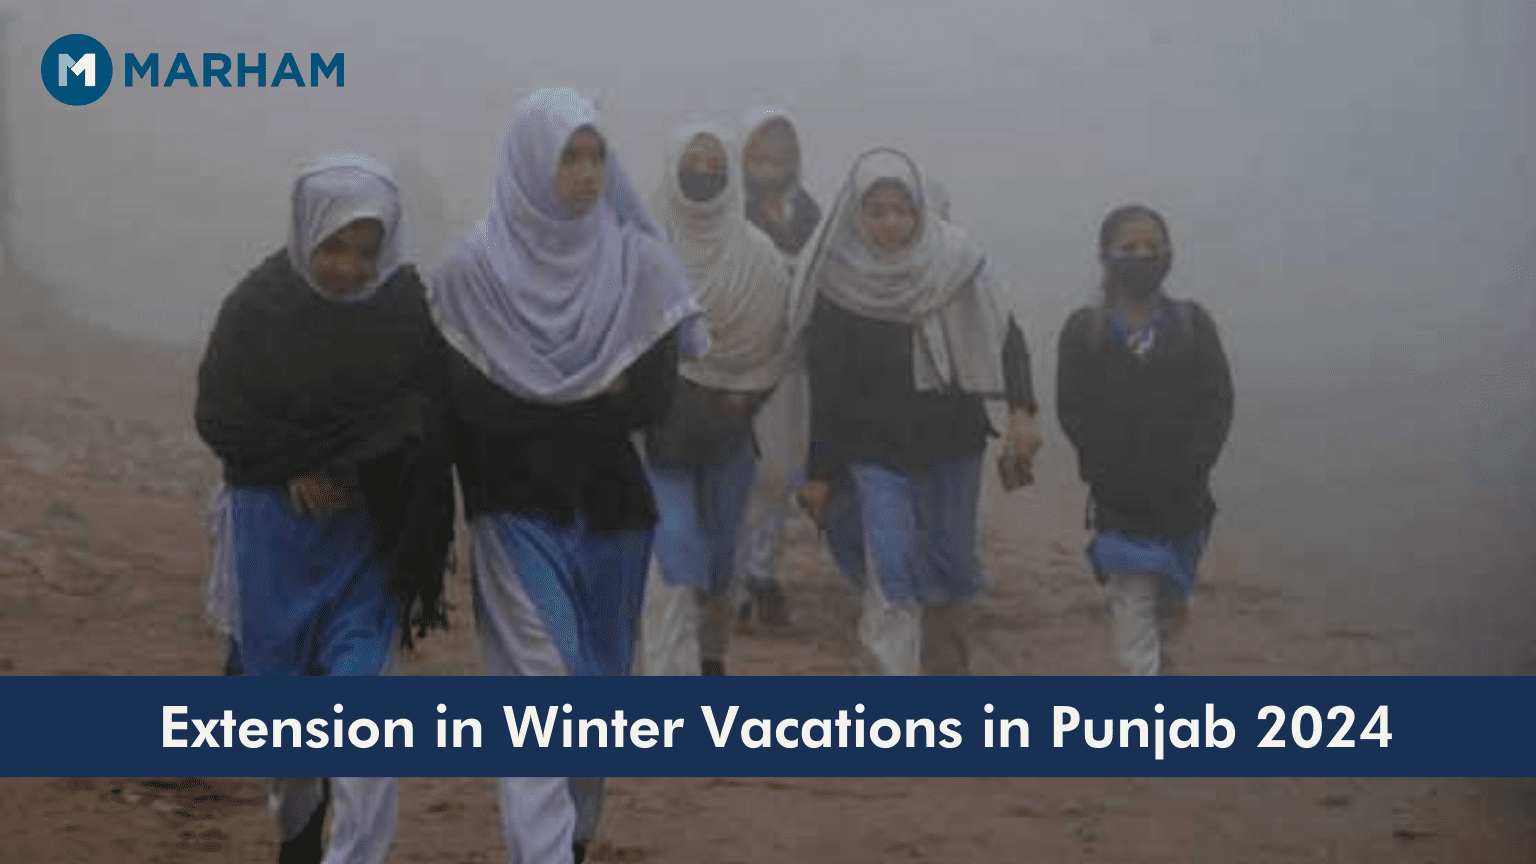 Notification for Extension in Winter Vacations in Punjab 2024